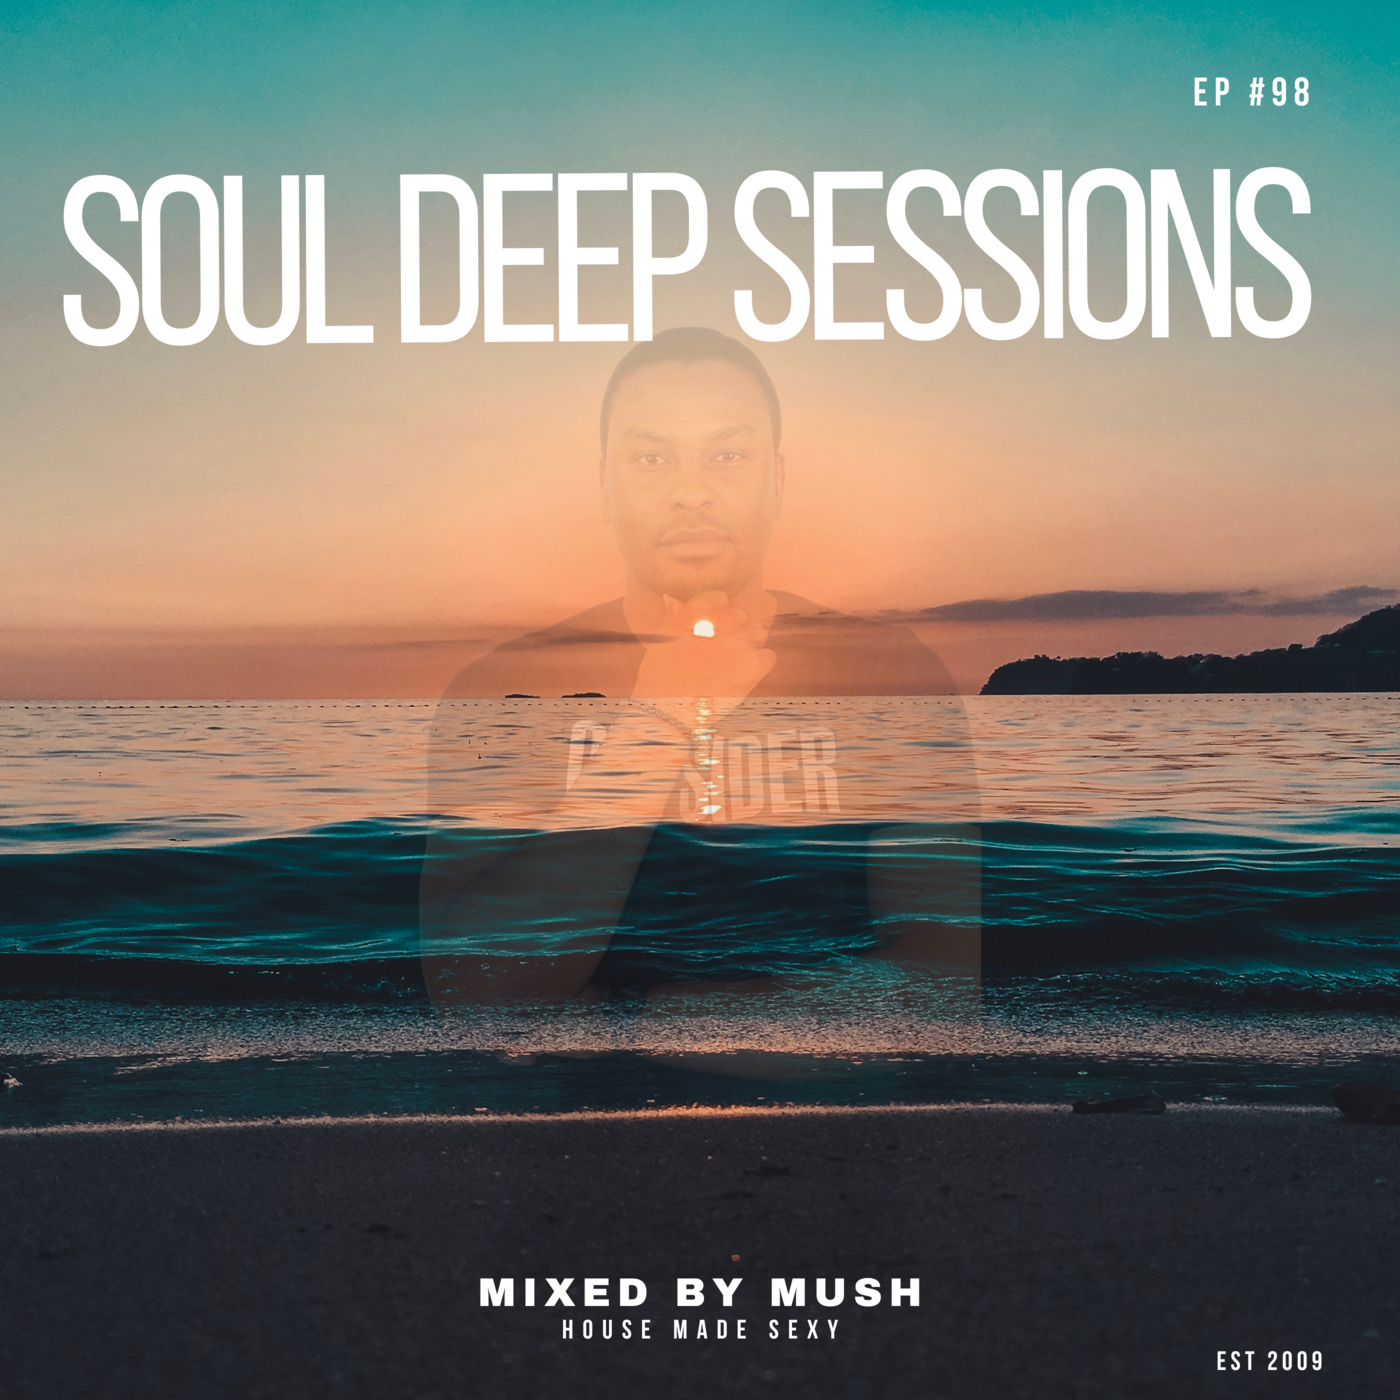 Episode 98: Soul Deep Sessions 98 mixed by Mush